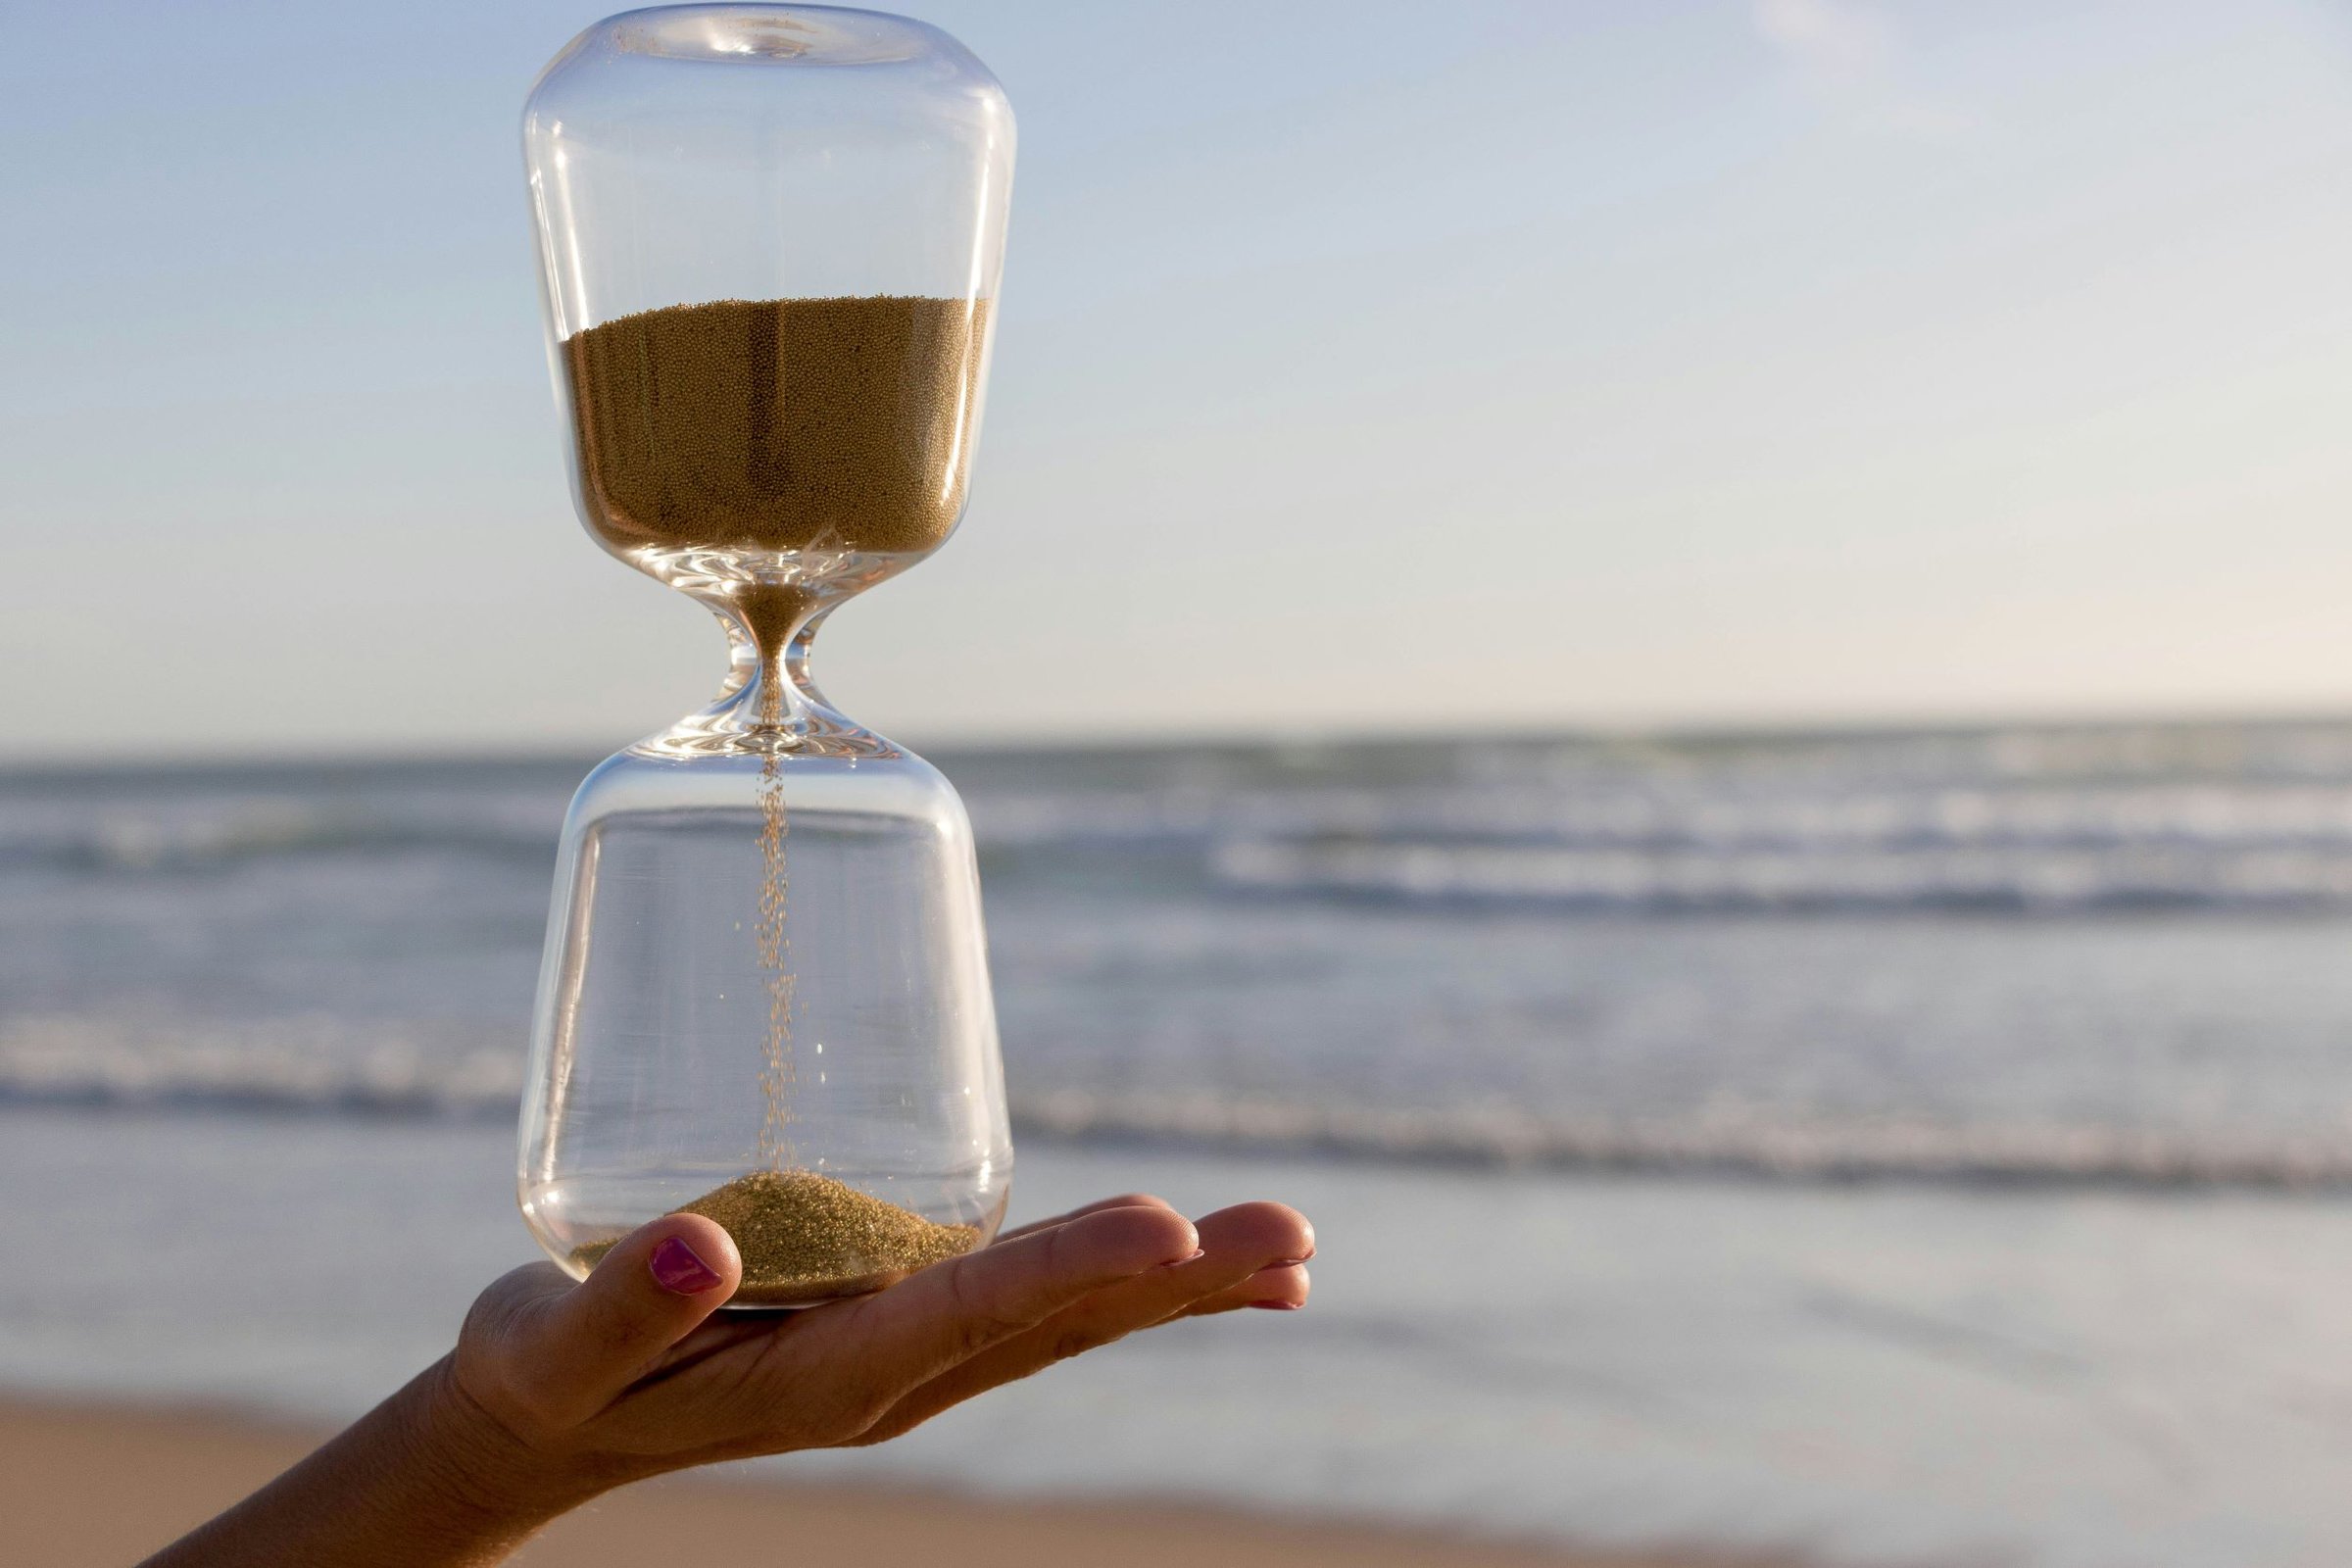 hourglass in a hand on the beach